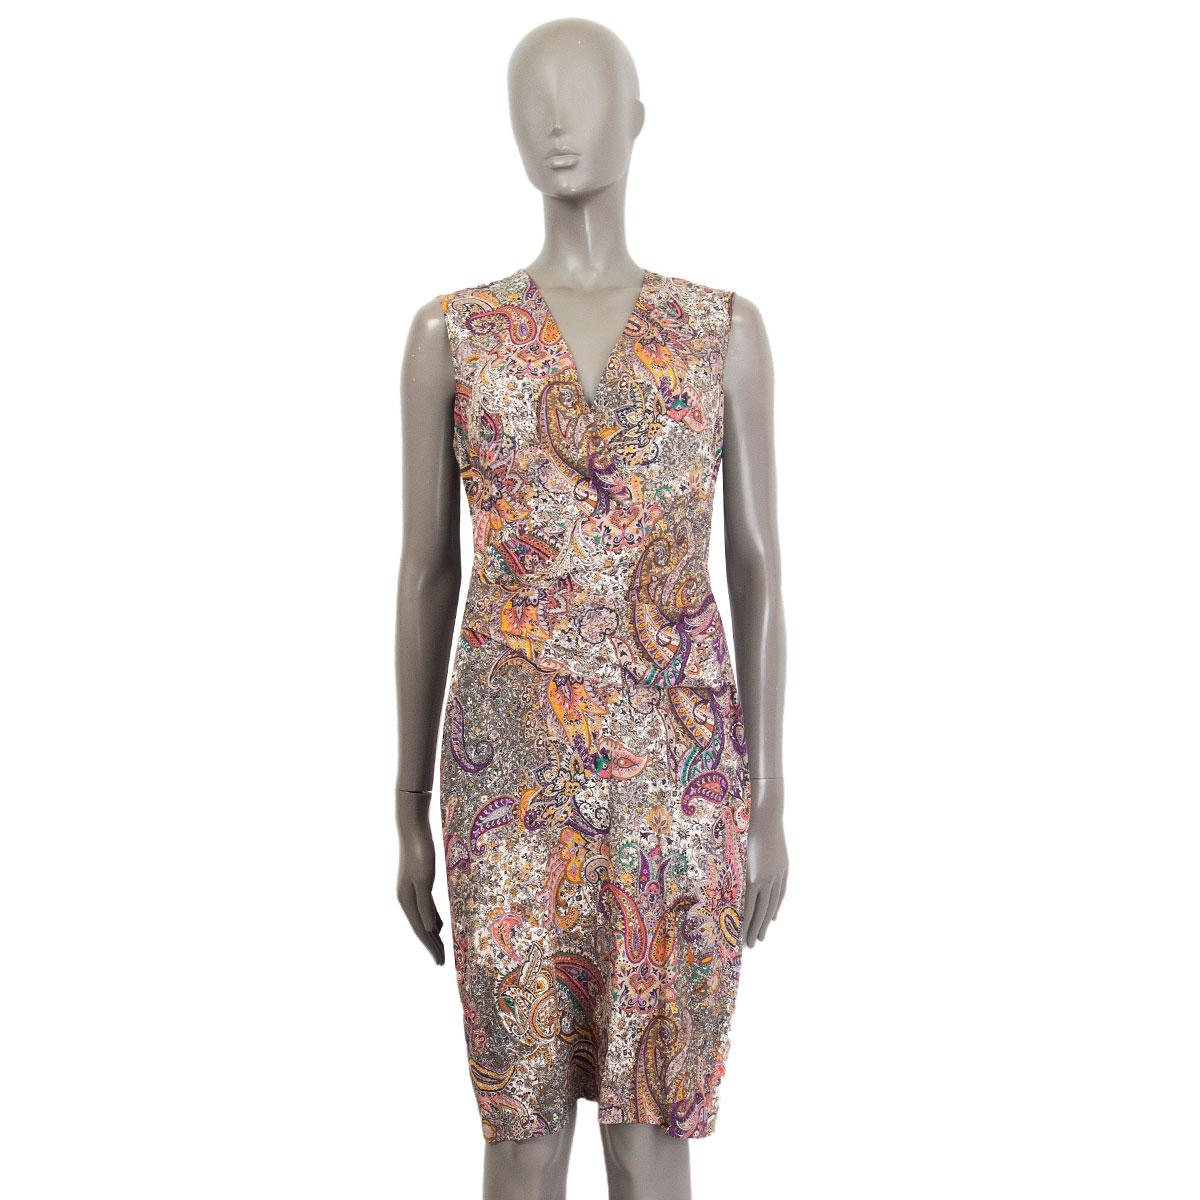 100% authentic Etro sleeveless draped paisley dress in taupe, olive, green, orange, pink, magenta, black, petrol, mustard silk (94%) and elastane (6%) with a v neck-line and draped around the waistline. Closes with a hook and a concealed zipper on